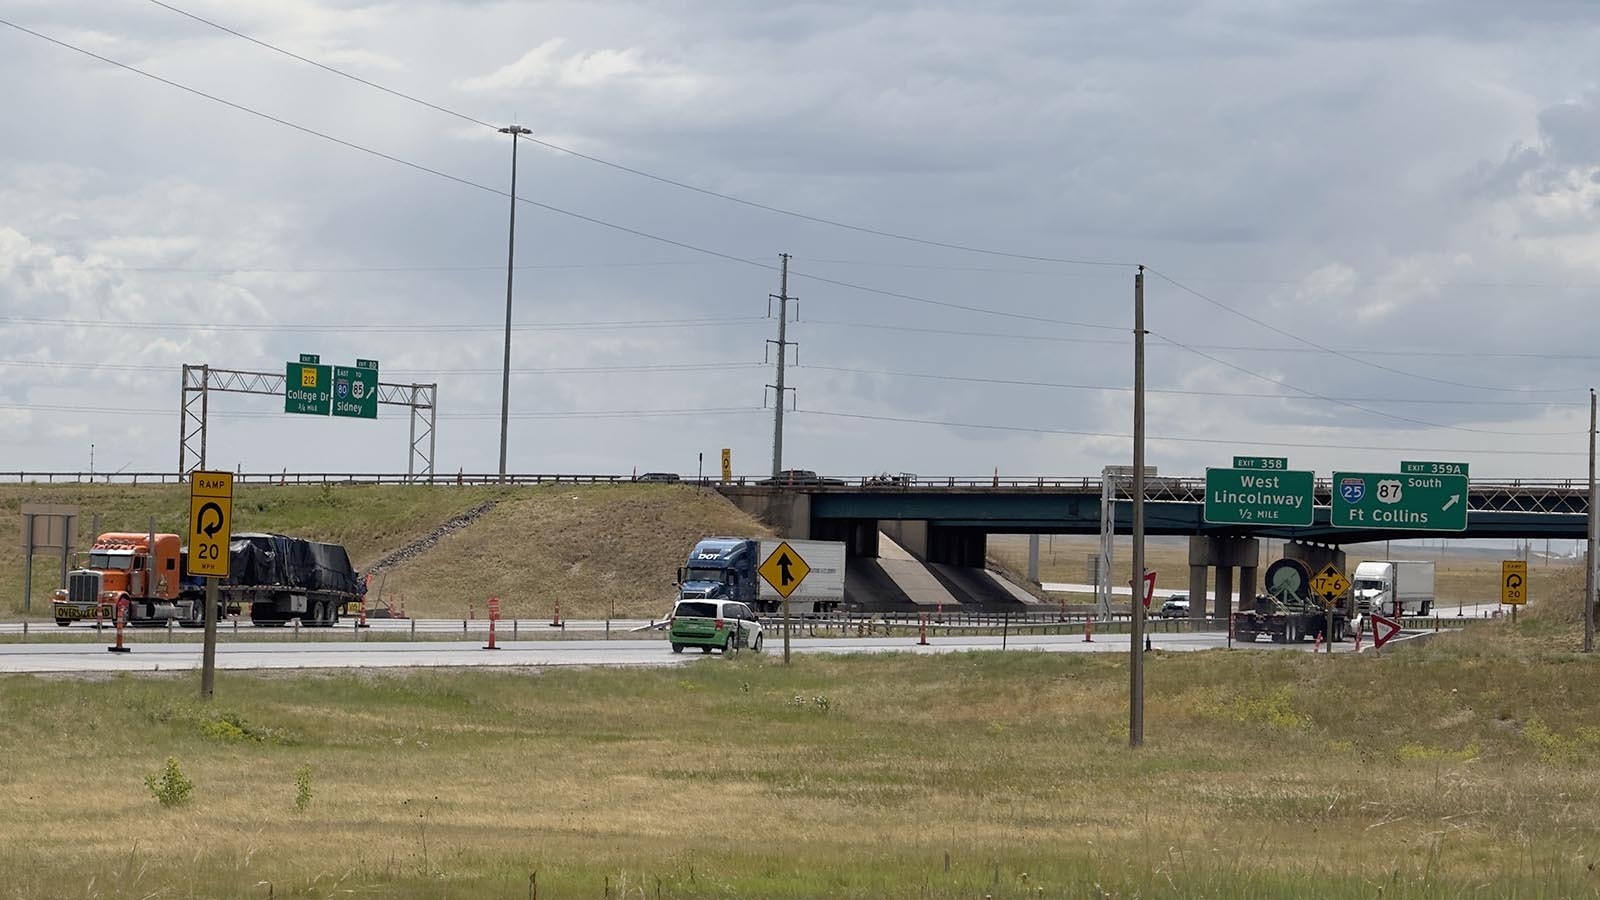 The intechange of Interstates 25 and 80 in Cheyenne is undergoing construction, but another huge $500 million revamp is in the works.